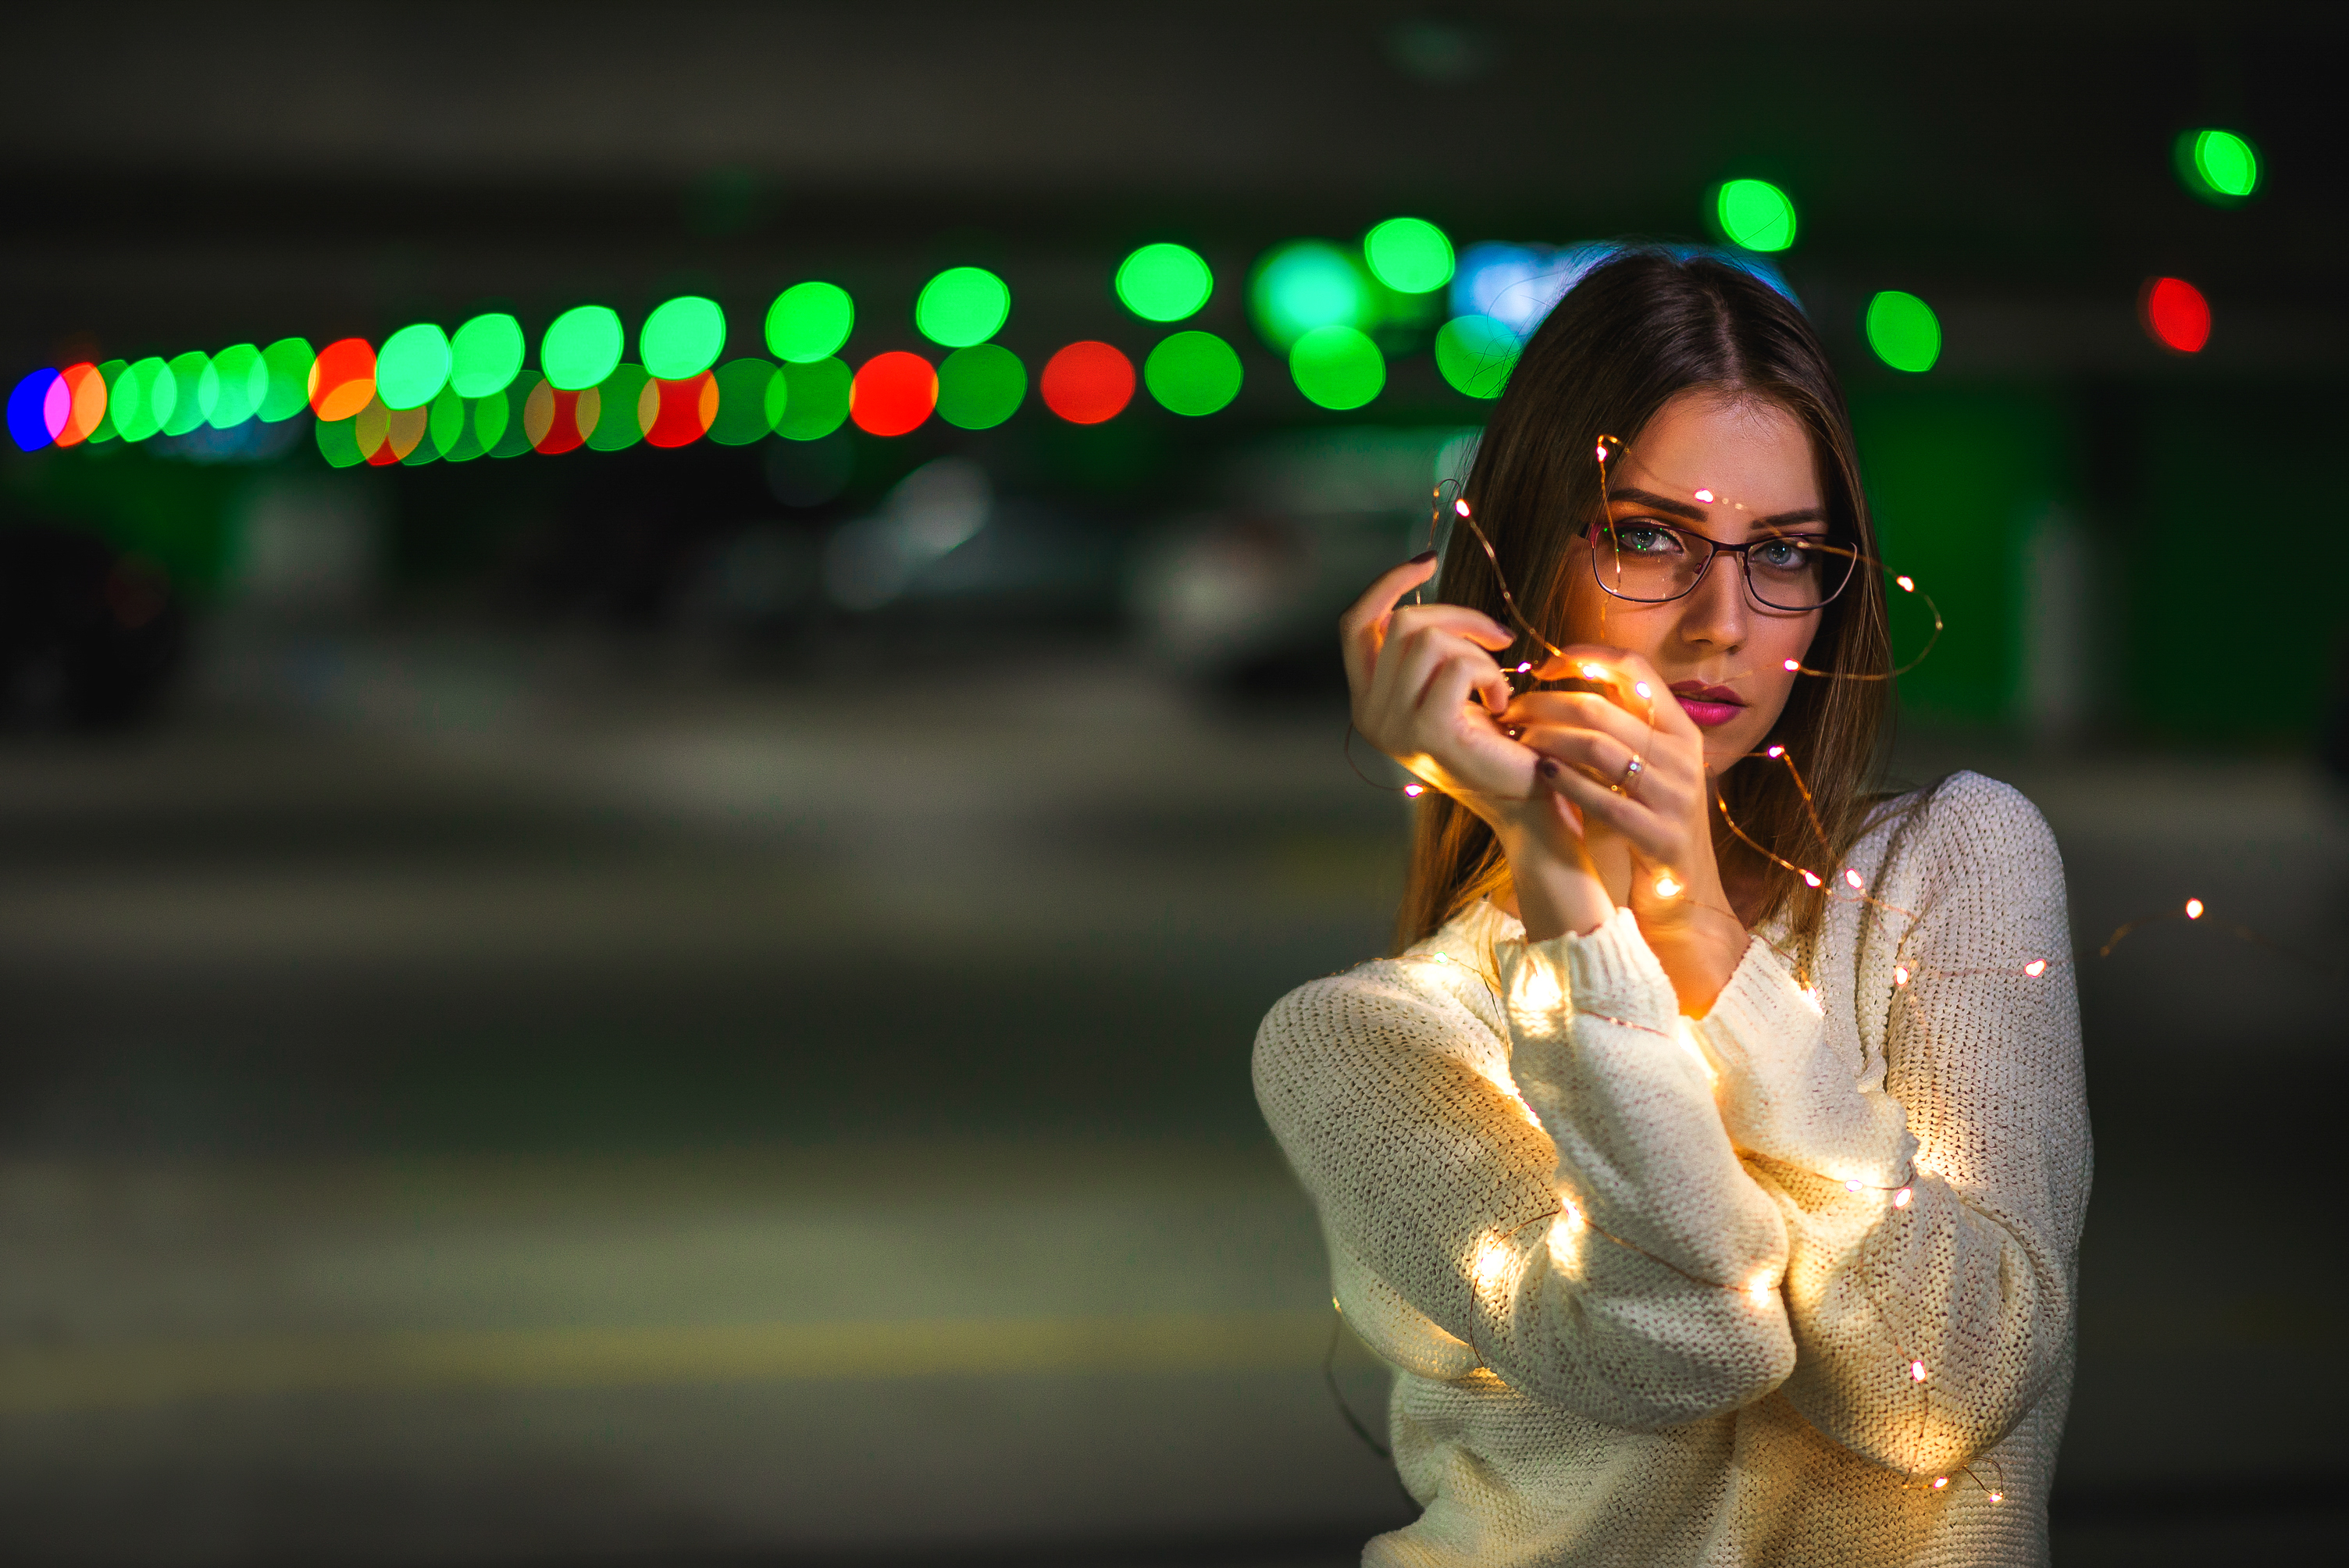 Dmitry Medved Women Model Brunette Looking At Viewer Women With Glasses Sweater White Sweater Lights 3008x2008